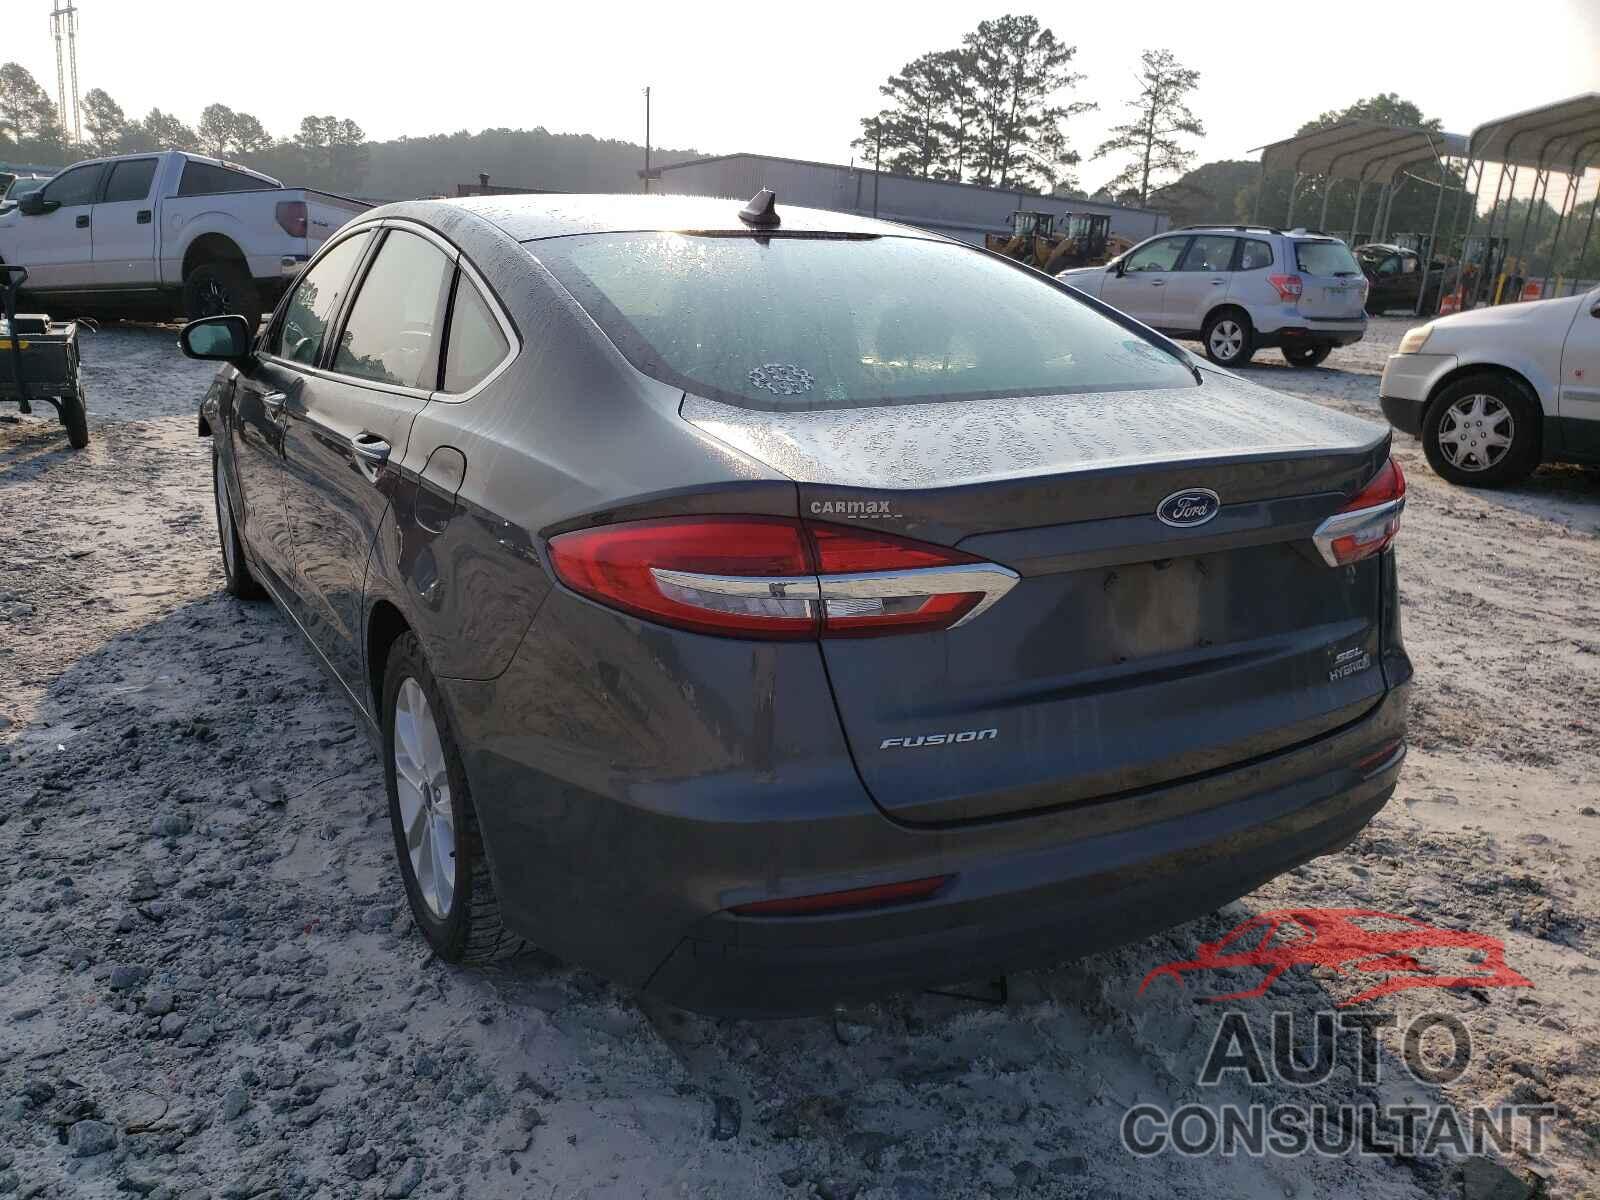 FORD FUSION 2019 - 3FA6P0MUXKR138866